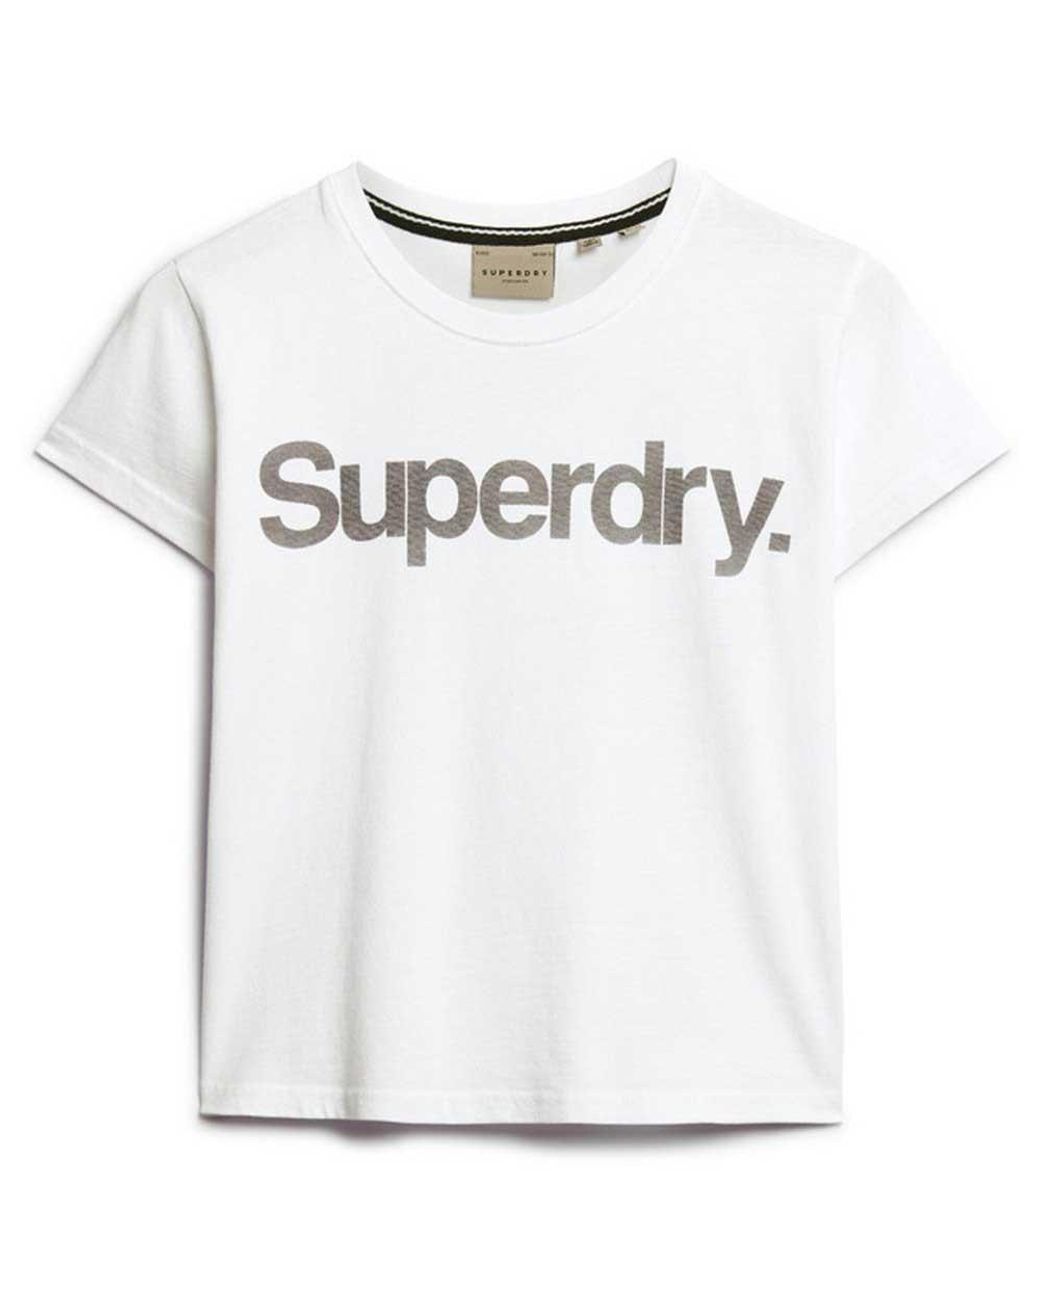 Superdry Uperdry Core Ogo City Fitted Hort Eeve T-hirt in White | Lyst